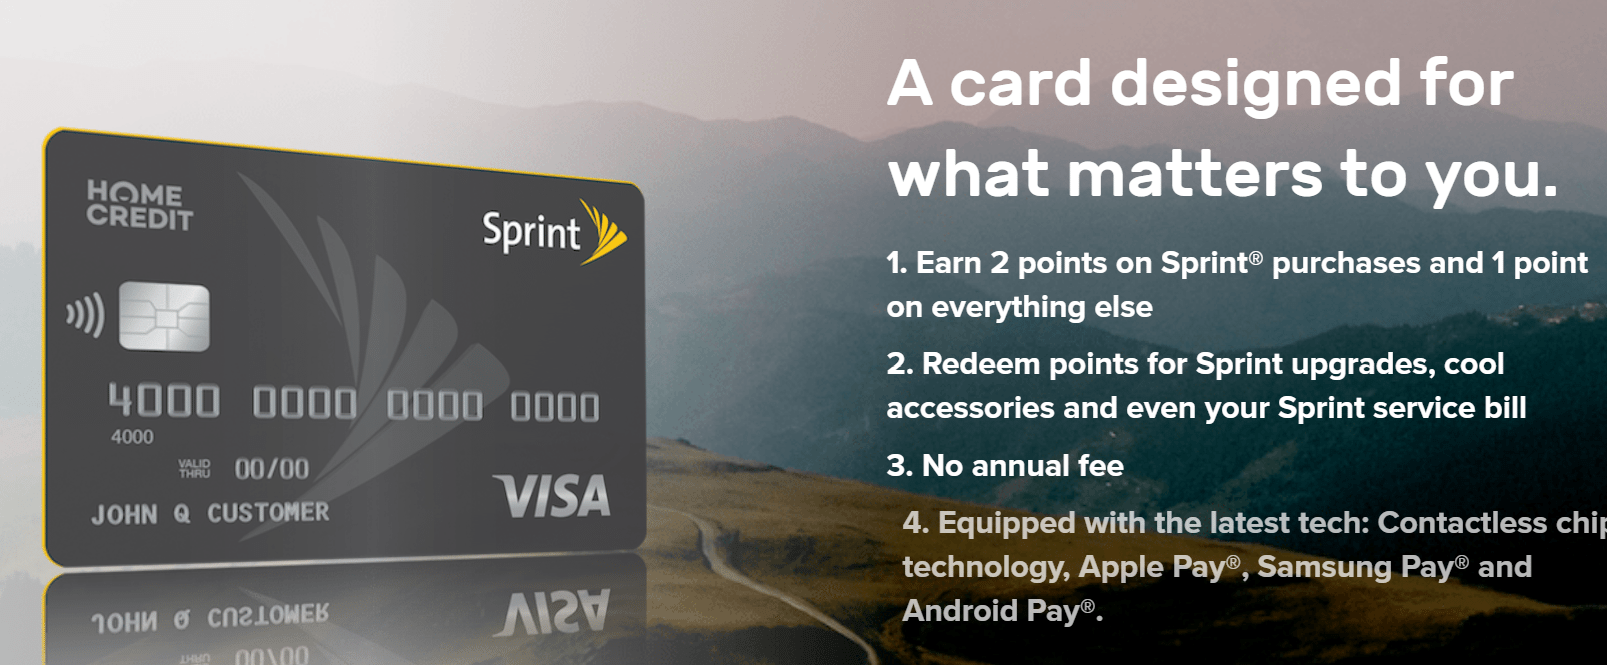 Sprint Visa Credit Card Review 2x Points On Sprint Purchases No Annual Fee Doctor Of Credit